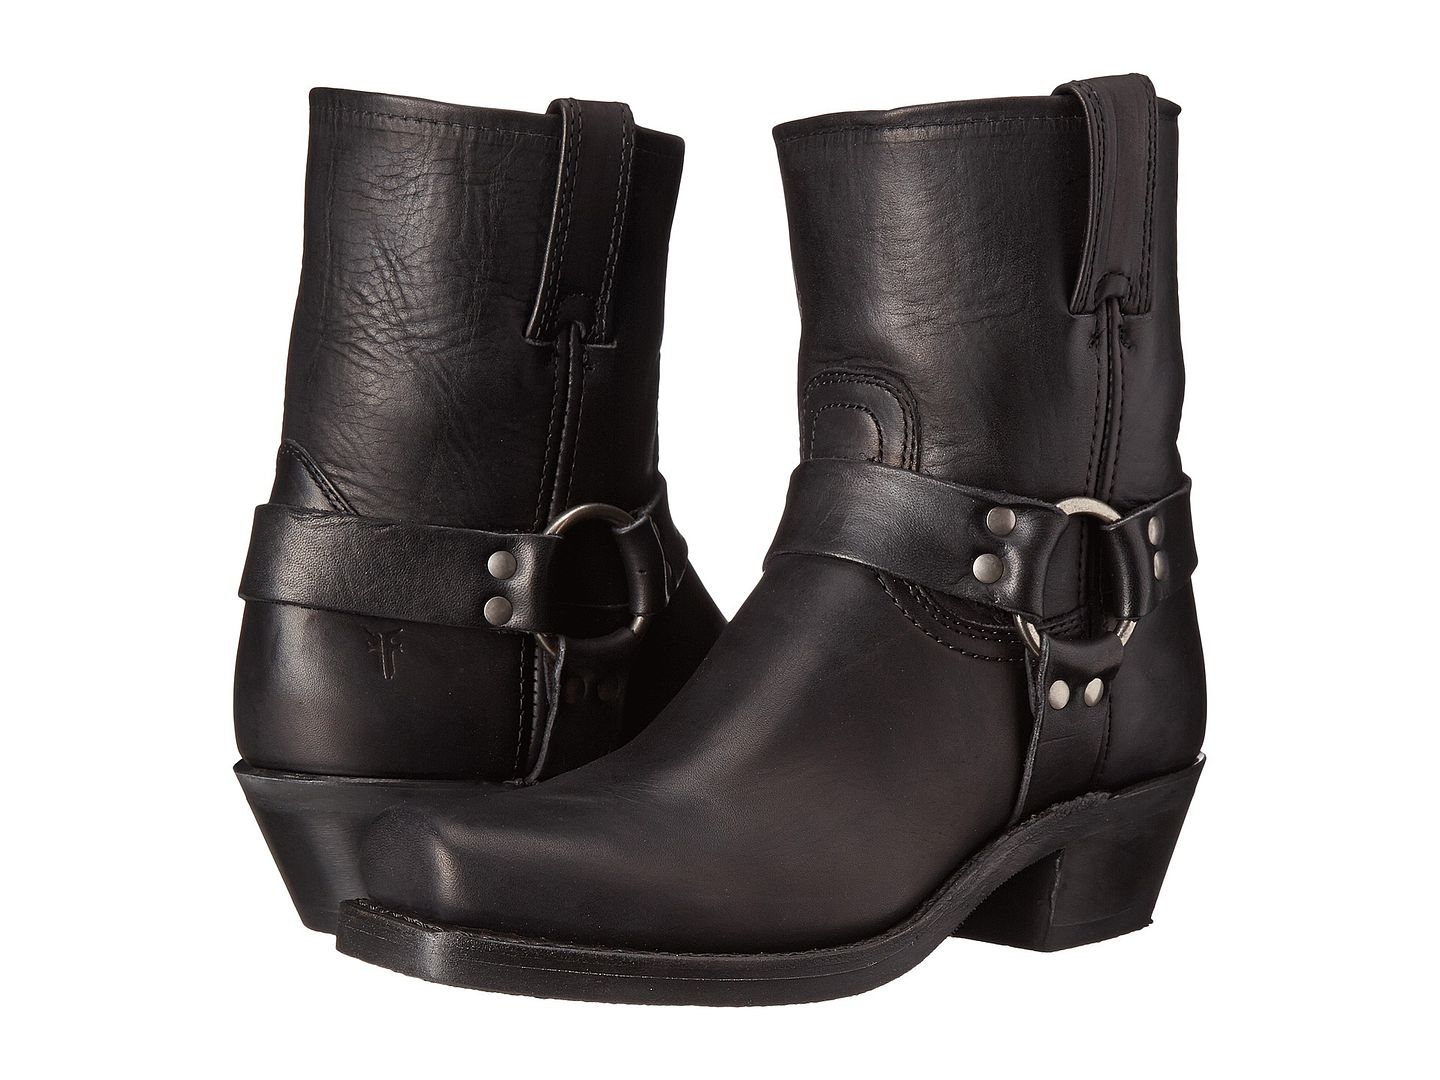 Frye Moto Boots are so in for fall. And every fall, really